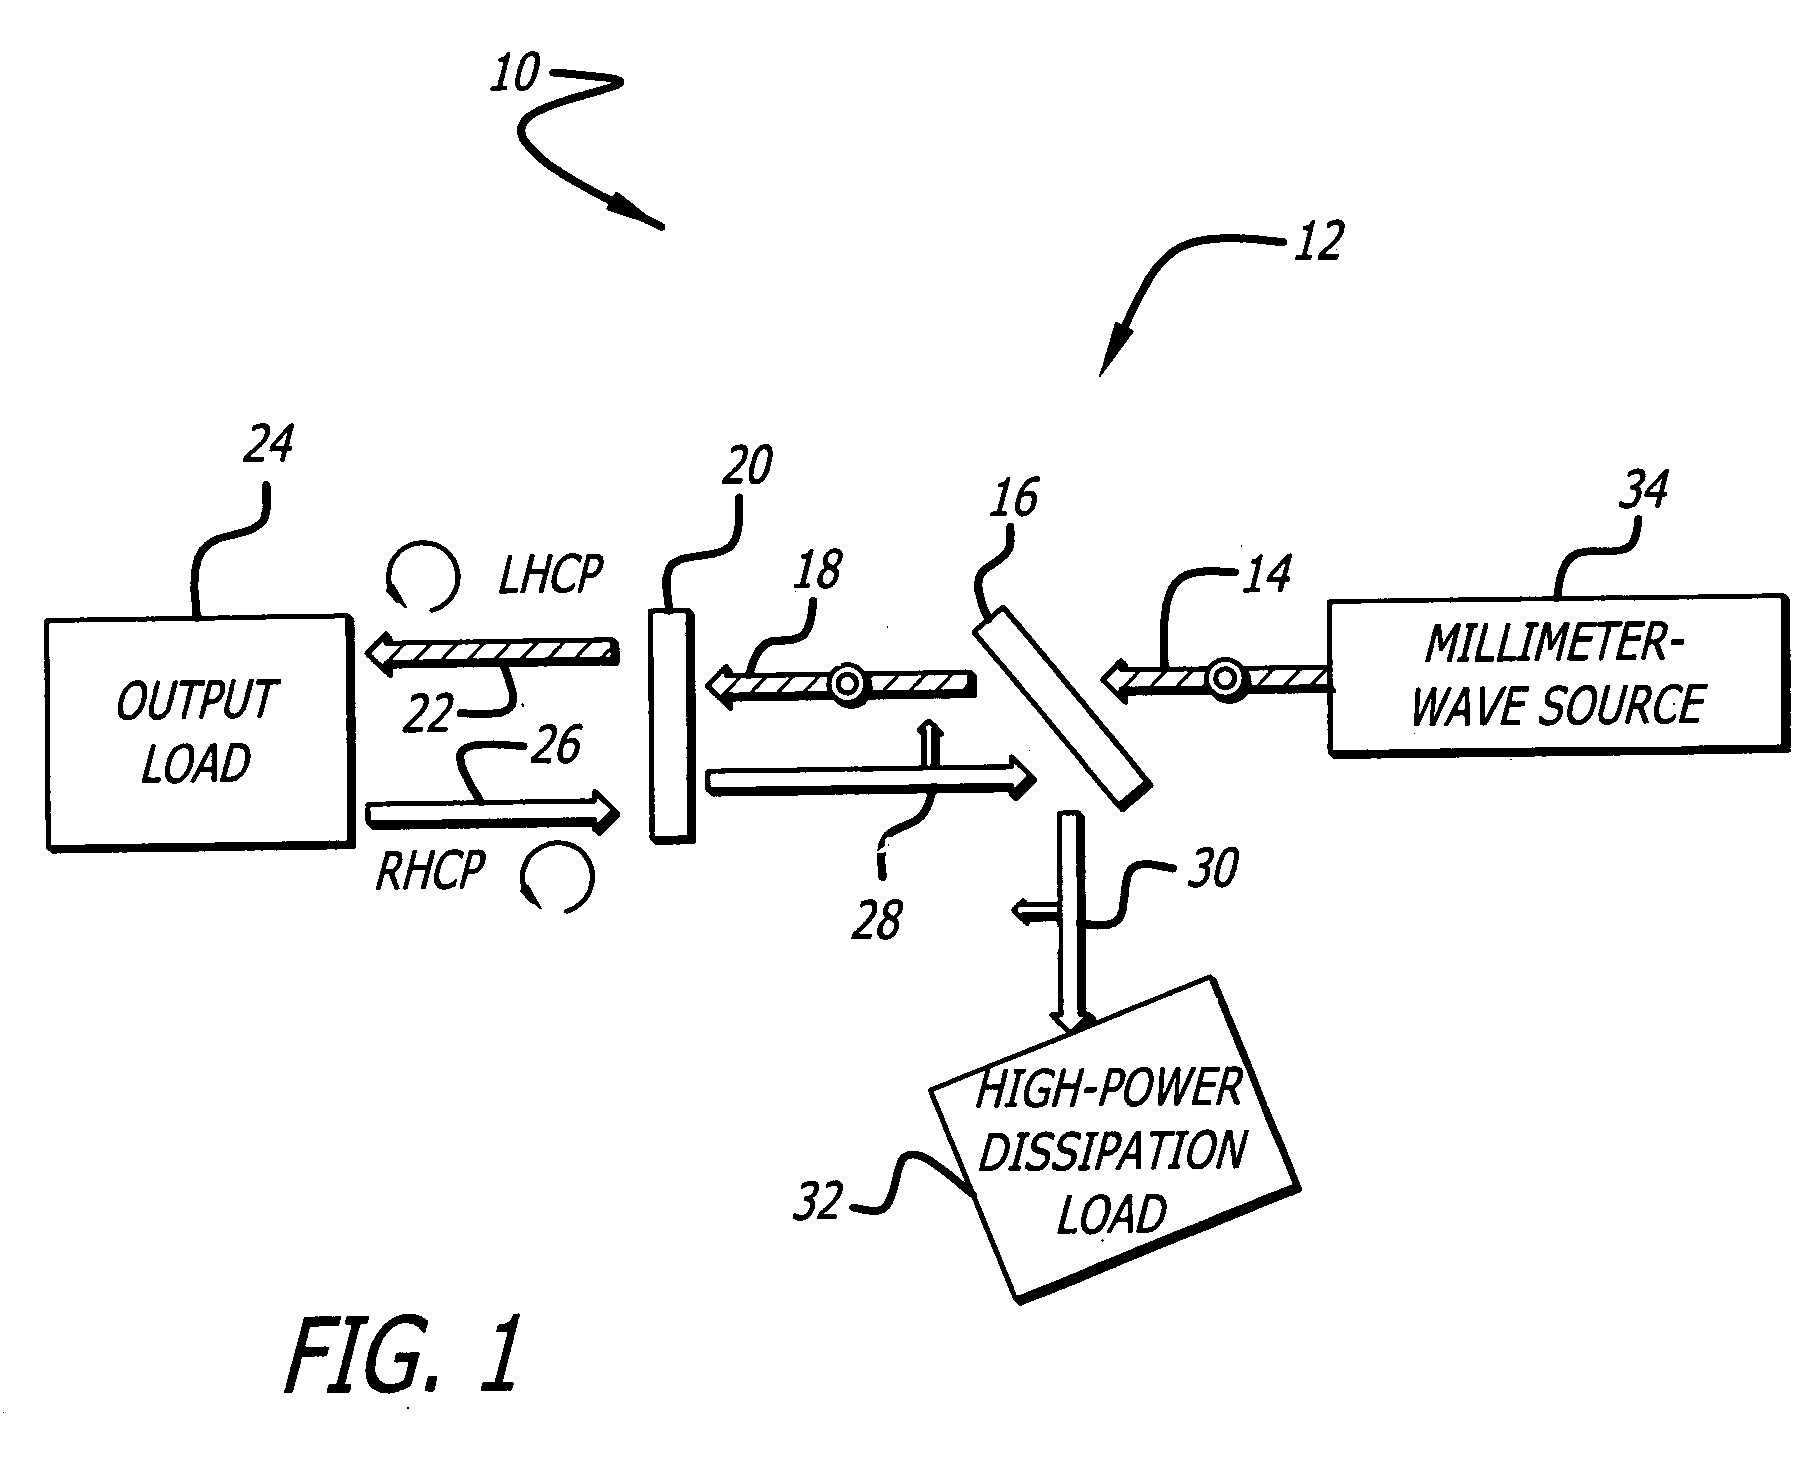 System for selectively blocking electromagnetic energy